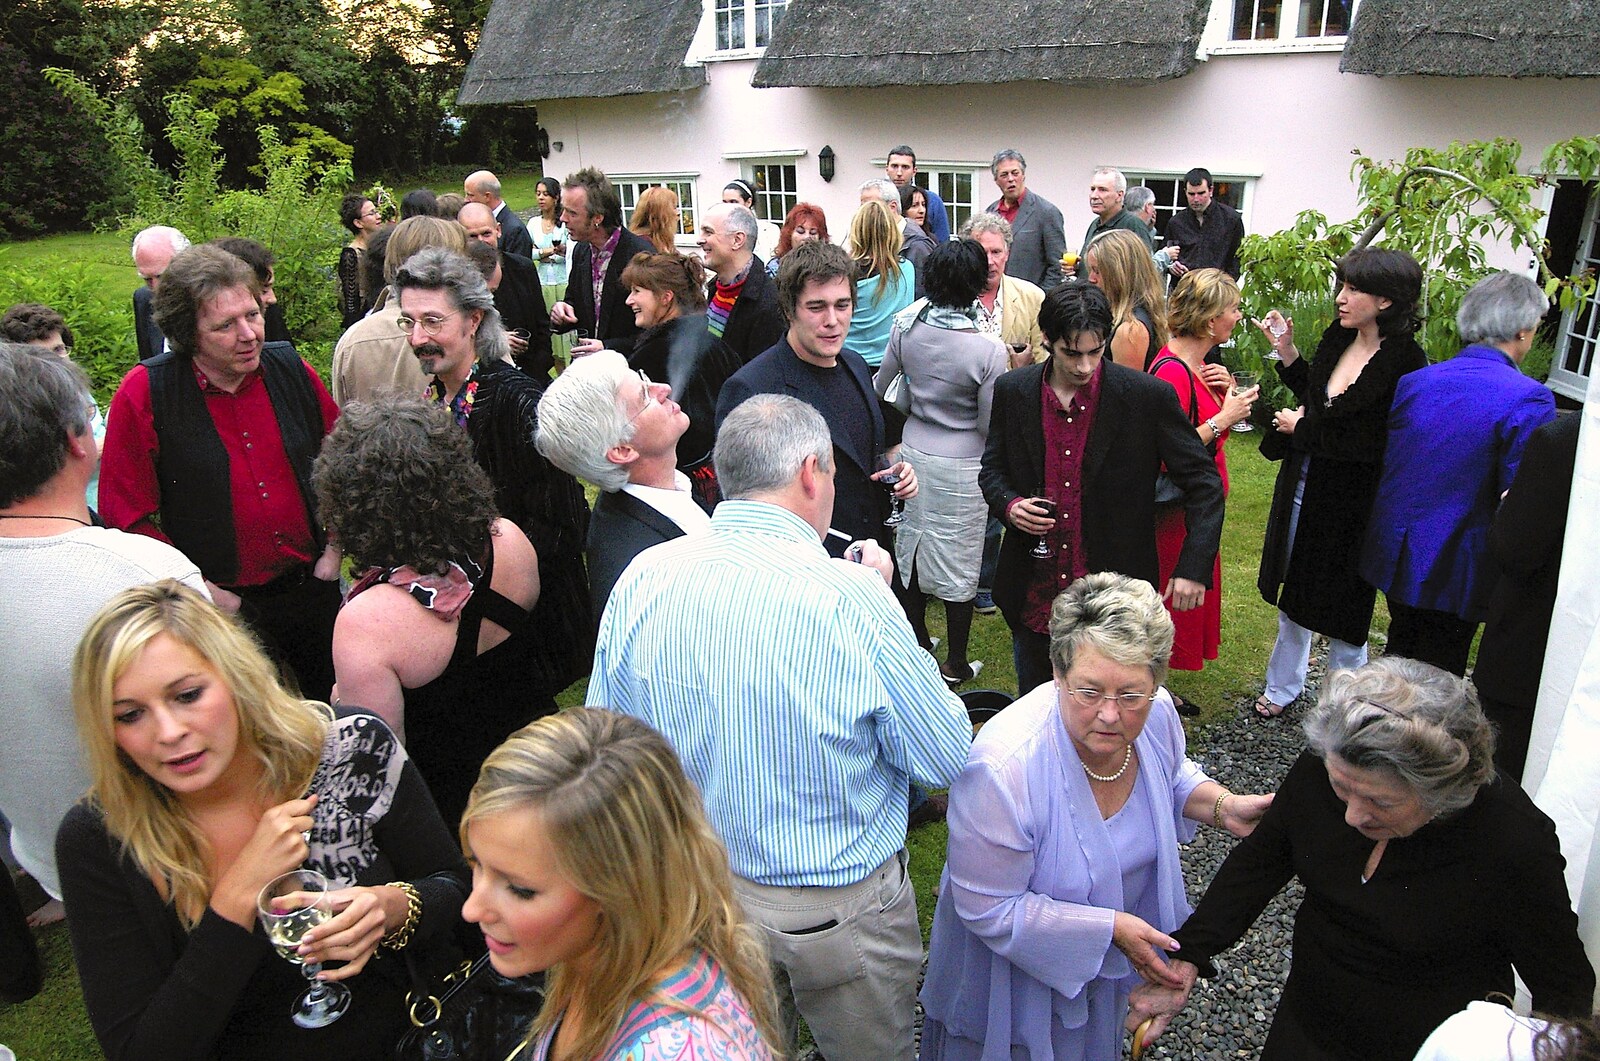 Guests in the garden from Henry and Fiona's Wedding Reception, Oakley, Suffolk - 2nd June 2006